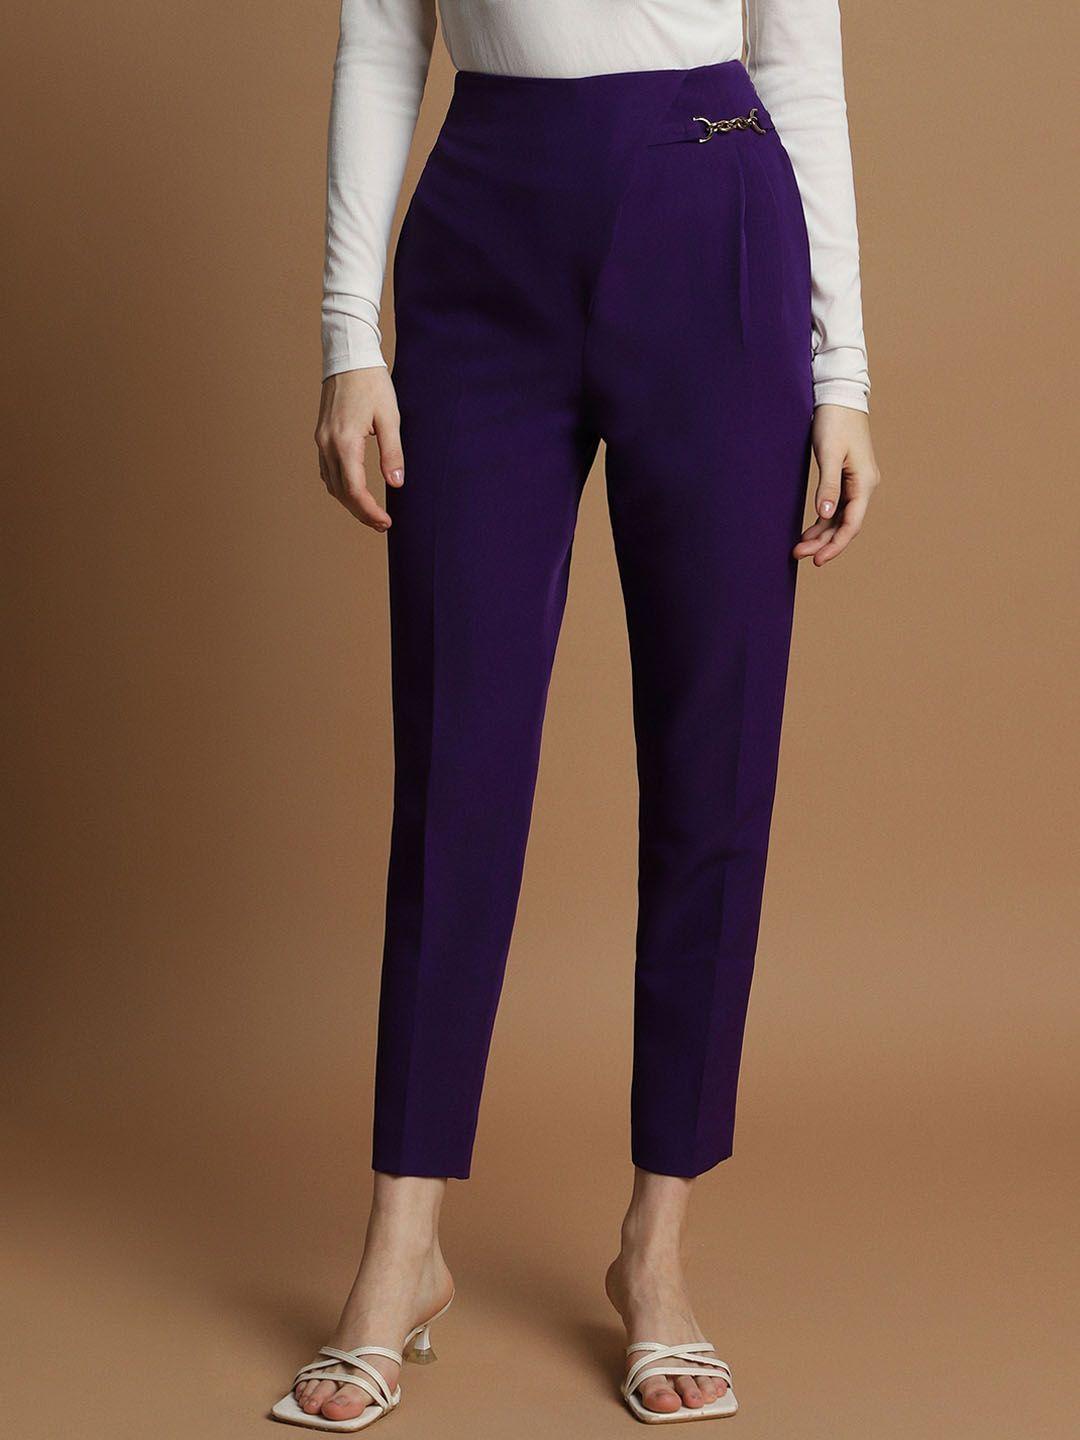 allen solly woman mid-rise slim fit cropped trousers